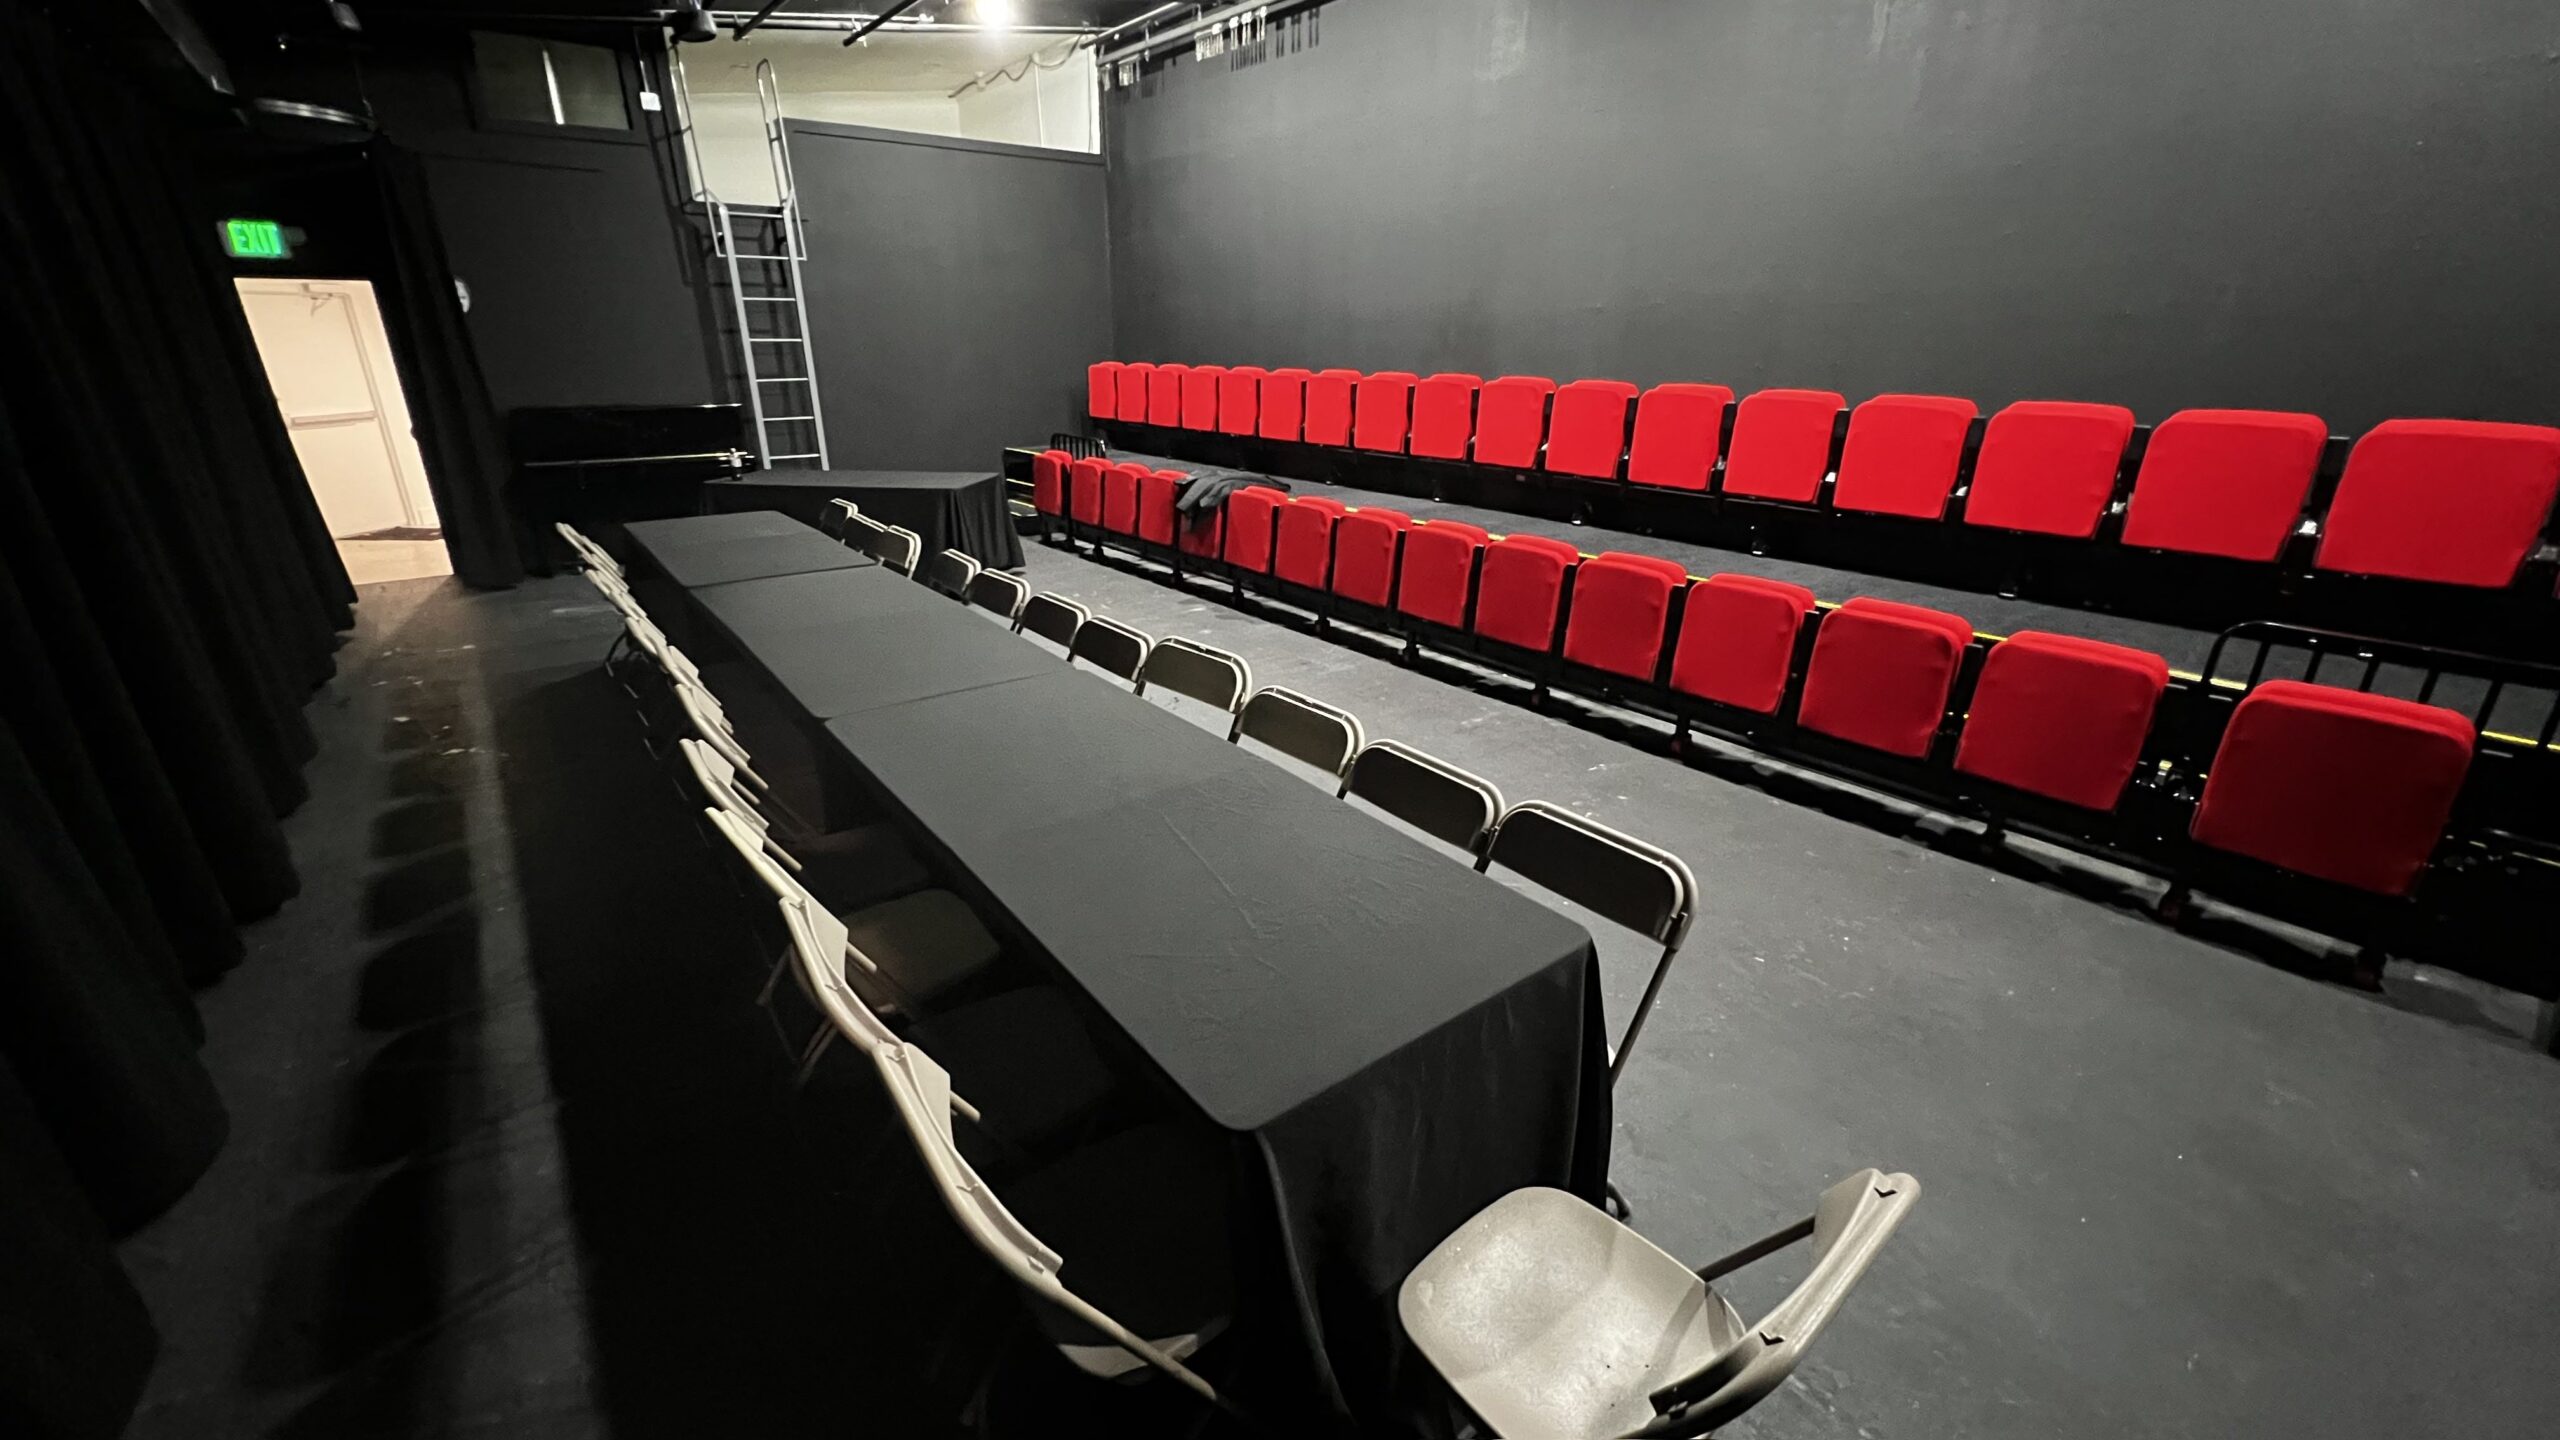 The Madnani Theater for the Community, in "meeting" configuration